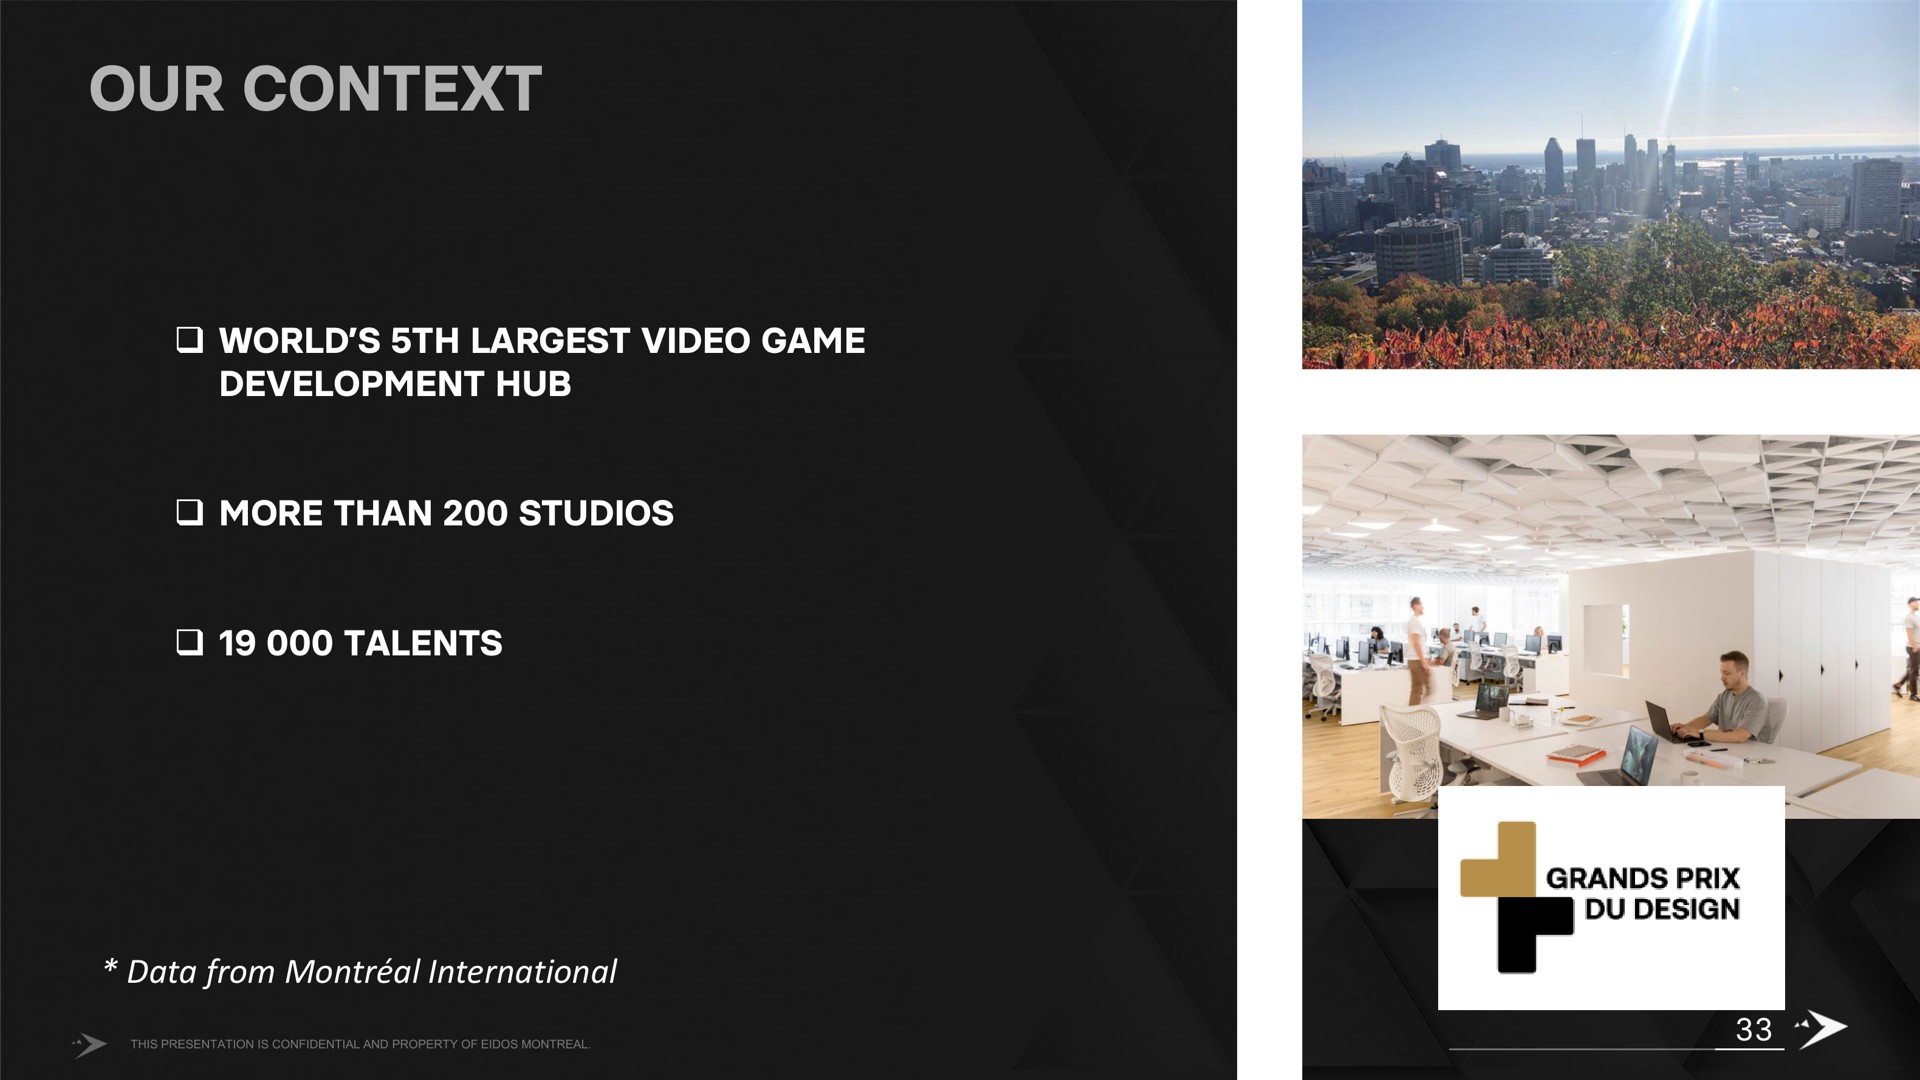 our context world video game development hub more than studios talents | Embracer Group